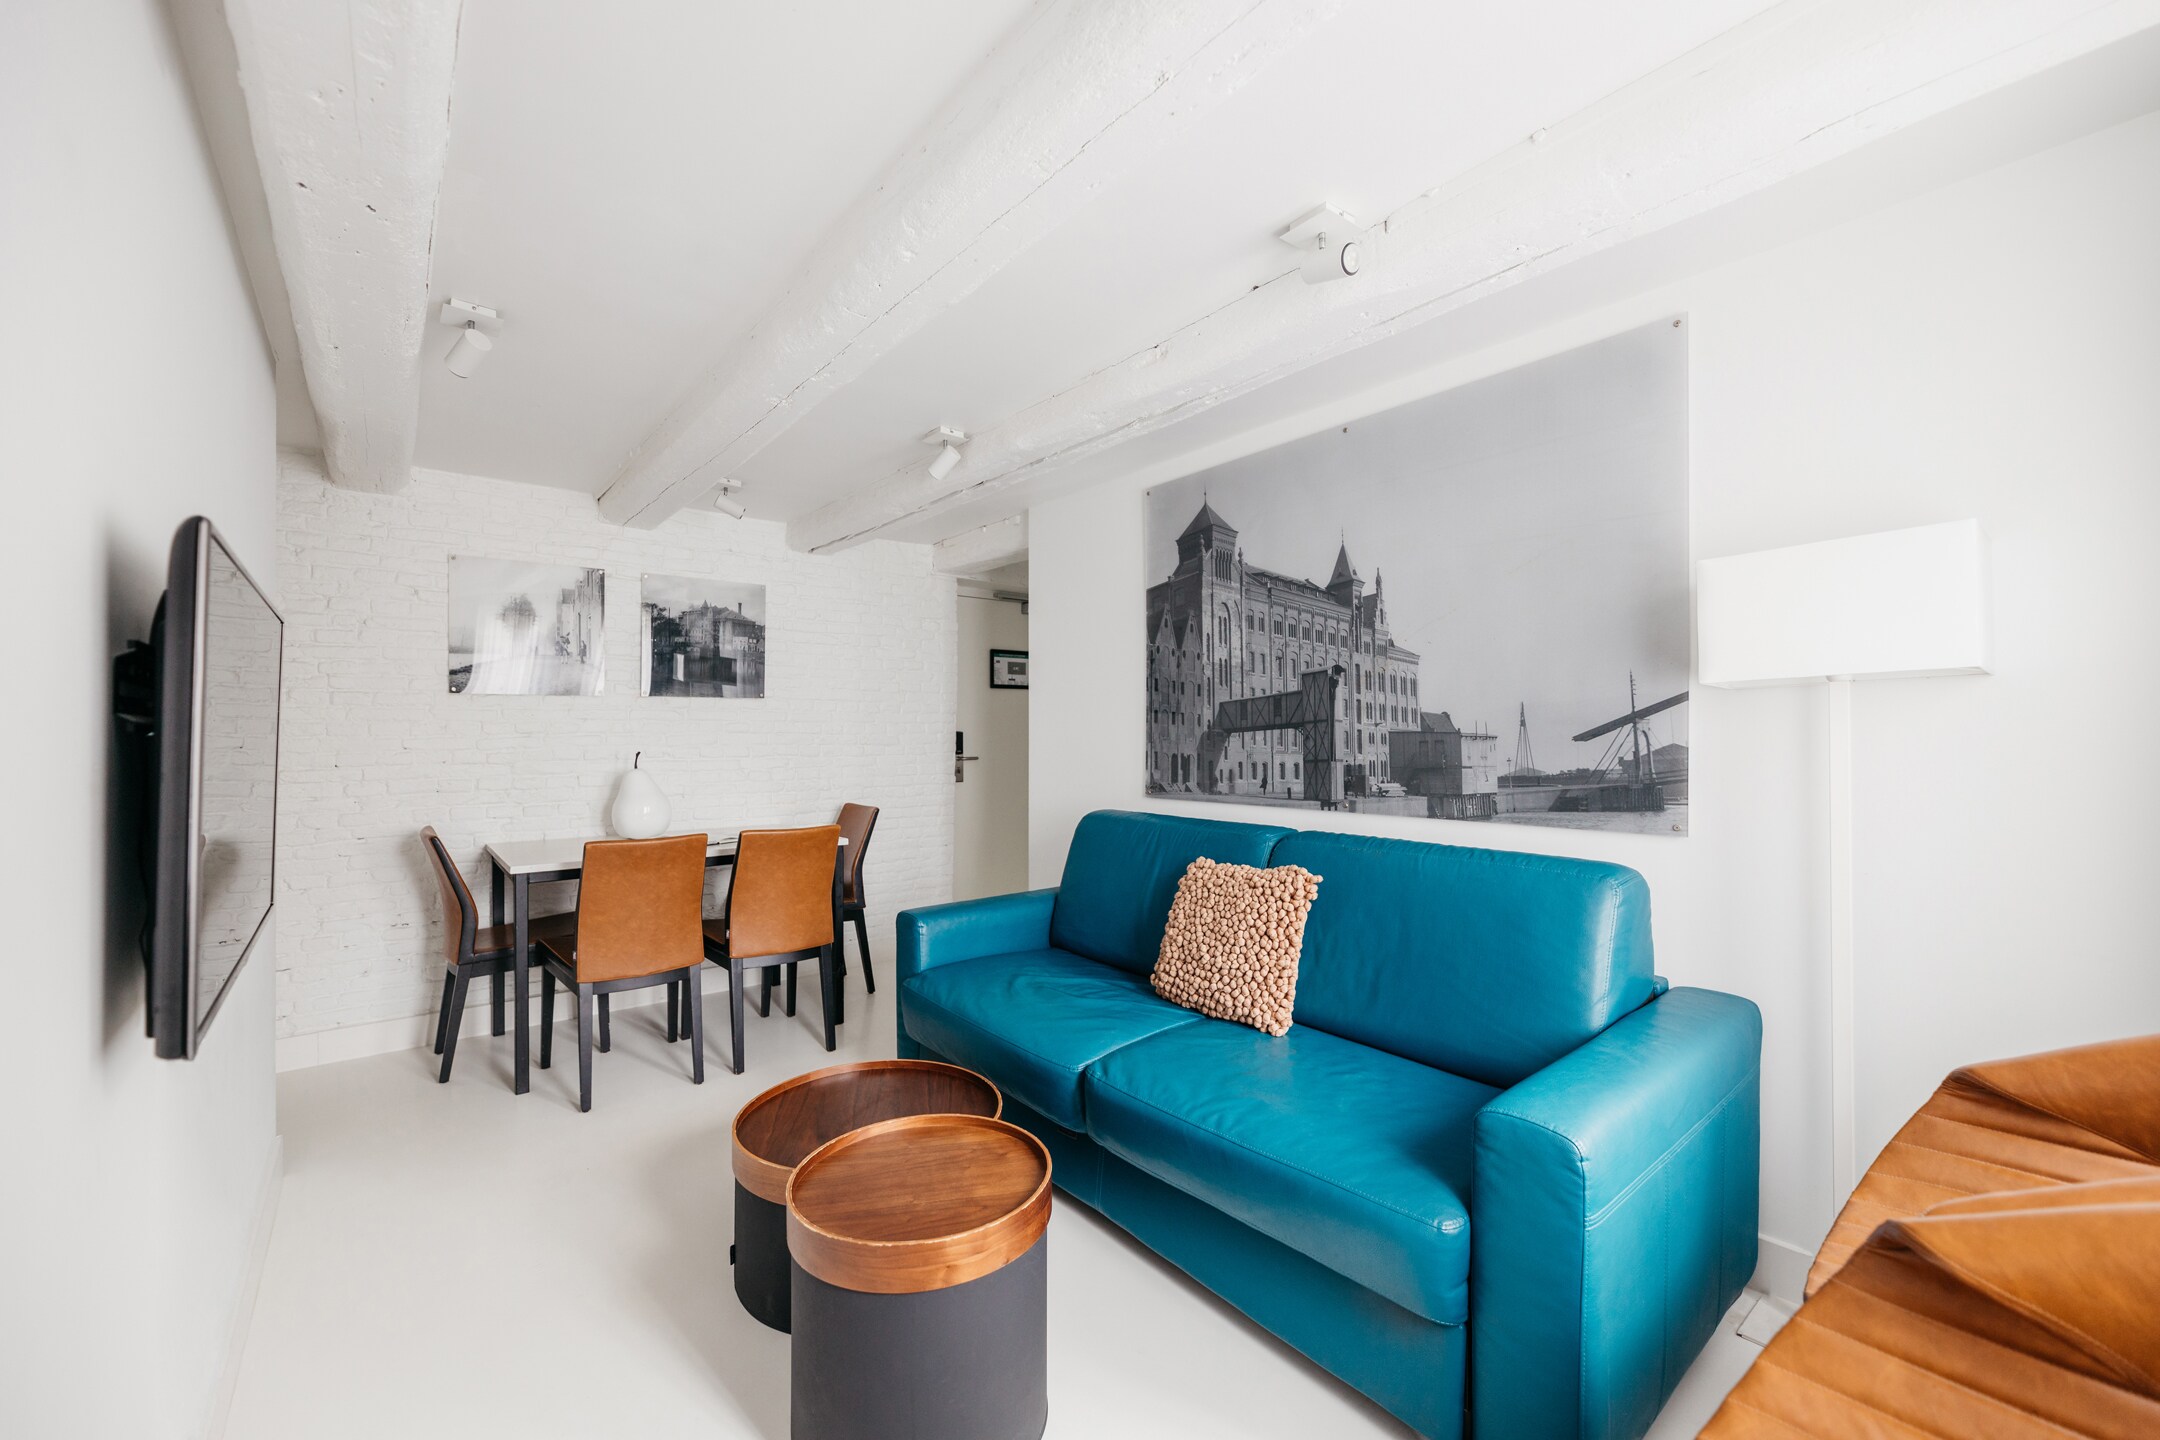 Property Image 2 - Glamorous family apartment by the Amsterdam canals